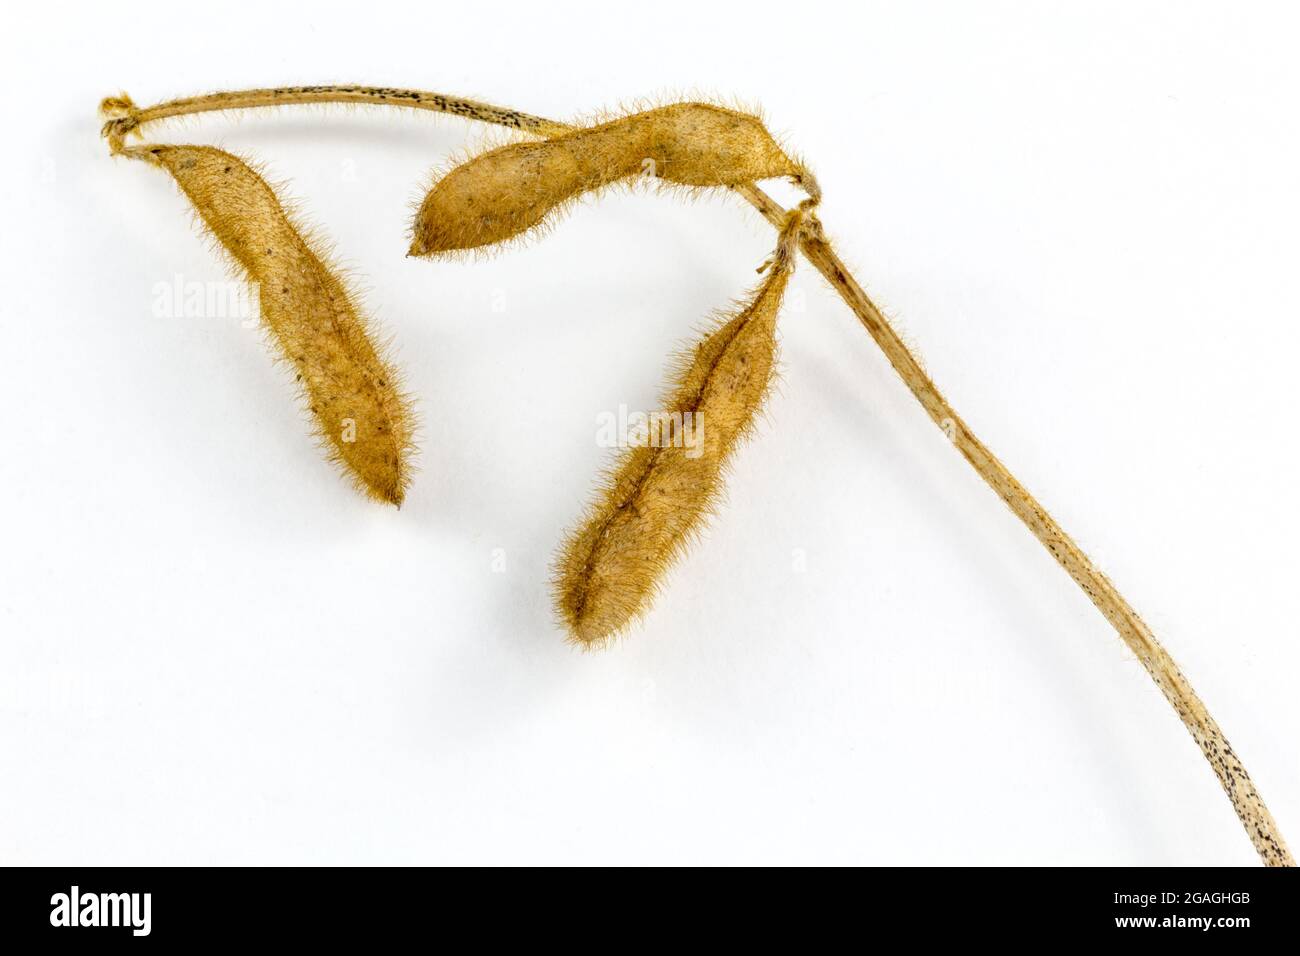 Soya plant stem with soybeans on a white background Stock Photo